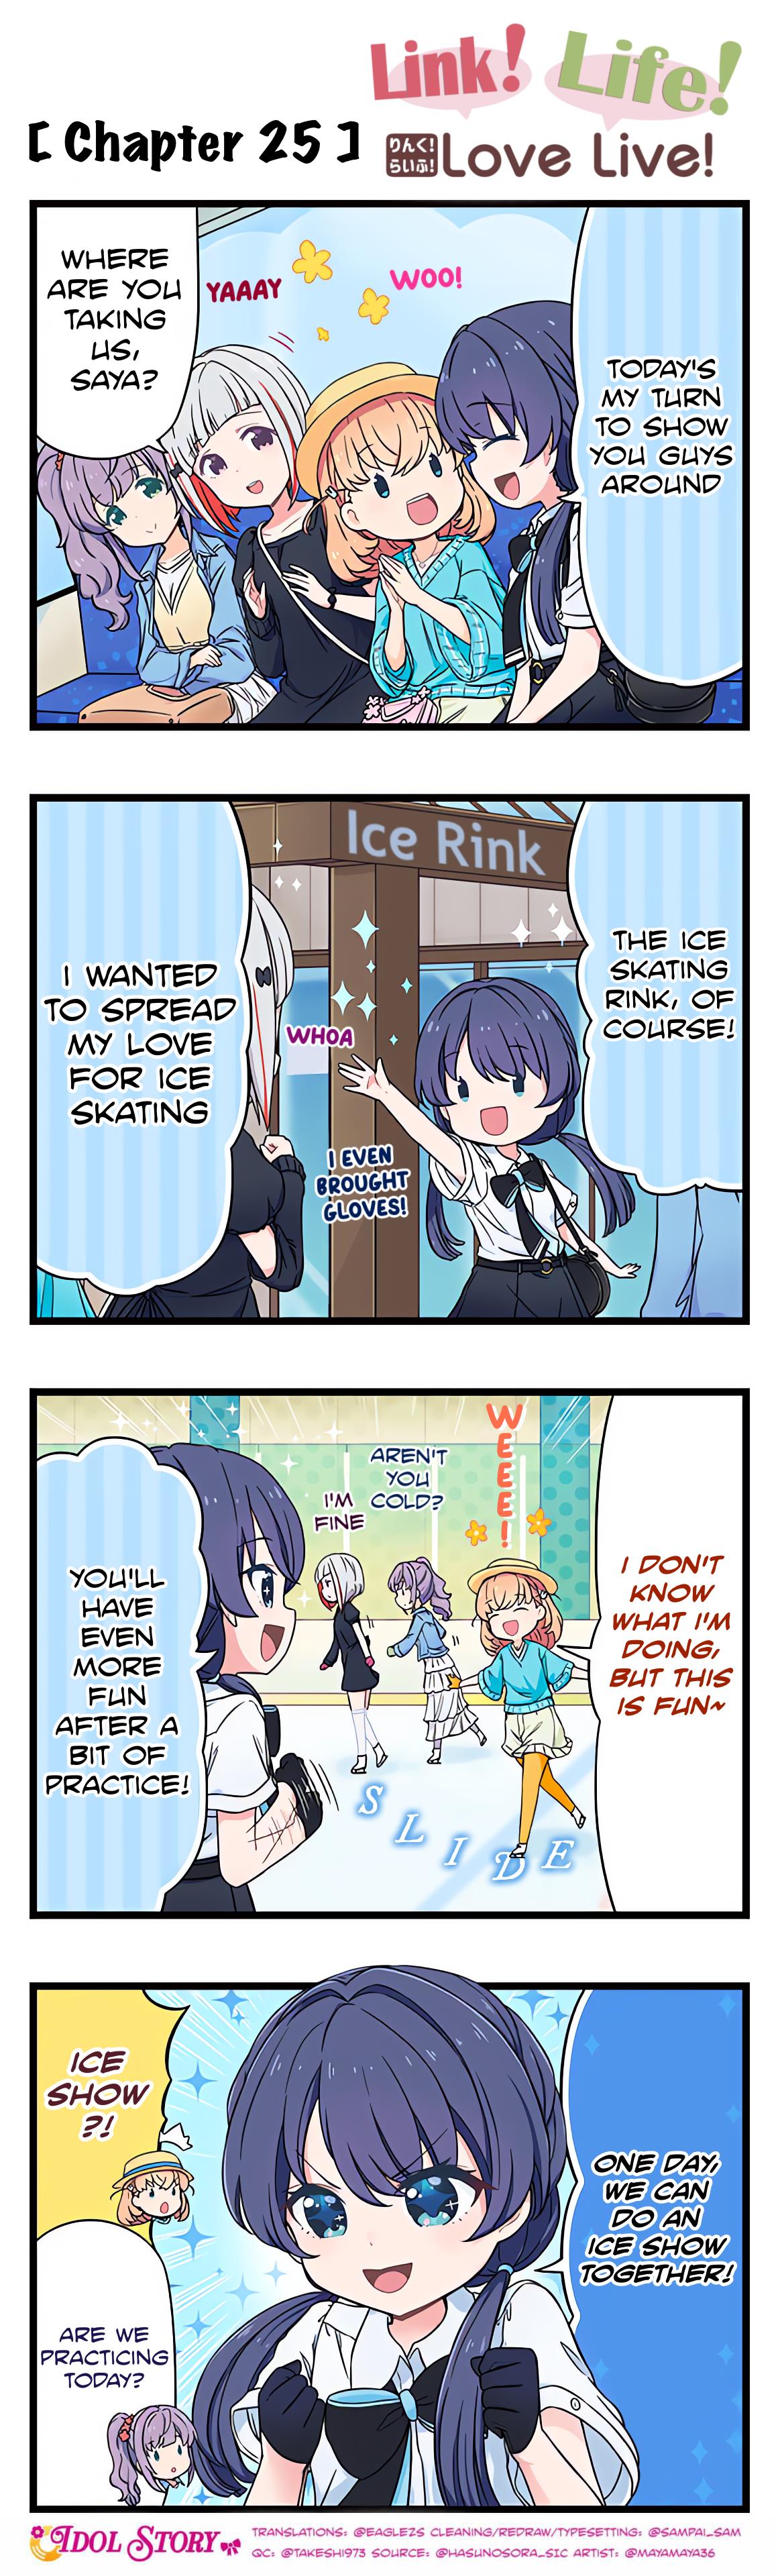 Link! Life! Love Live! Chapter 25 #1